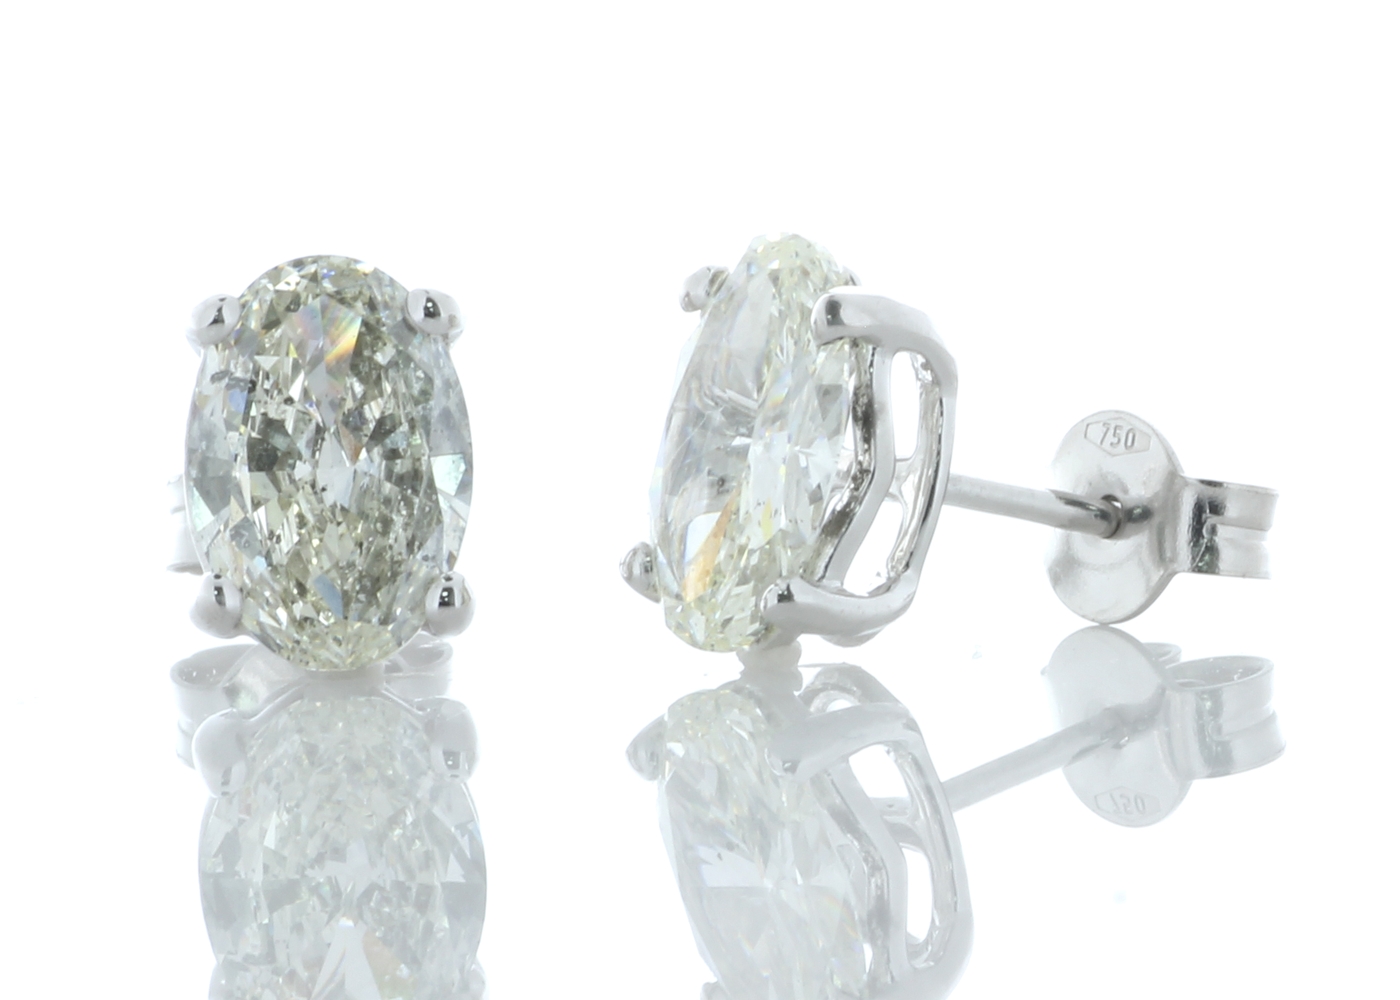 18ct White Gold Single Stone Oval Cut Diamond Earring 2.55 Carats - Valued By AGI £77,230.00 - Two - Image 2 of 4